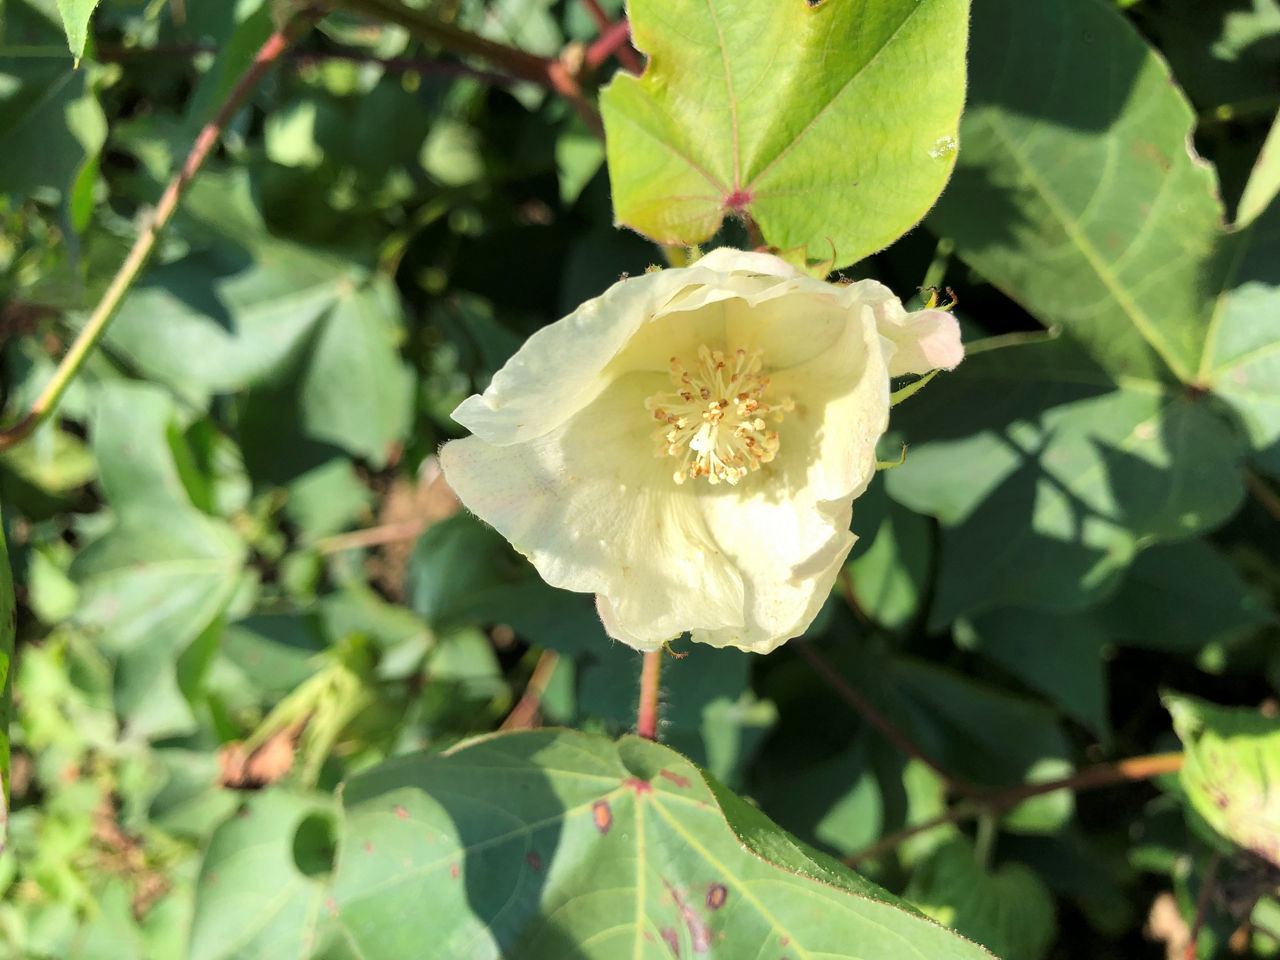 A ‘dirty’ cotton bloom due to plant bug feeding.